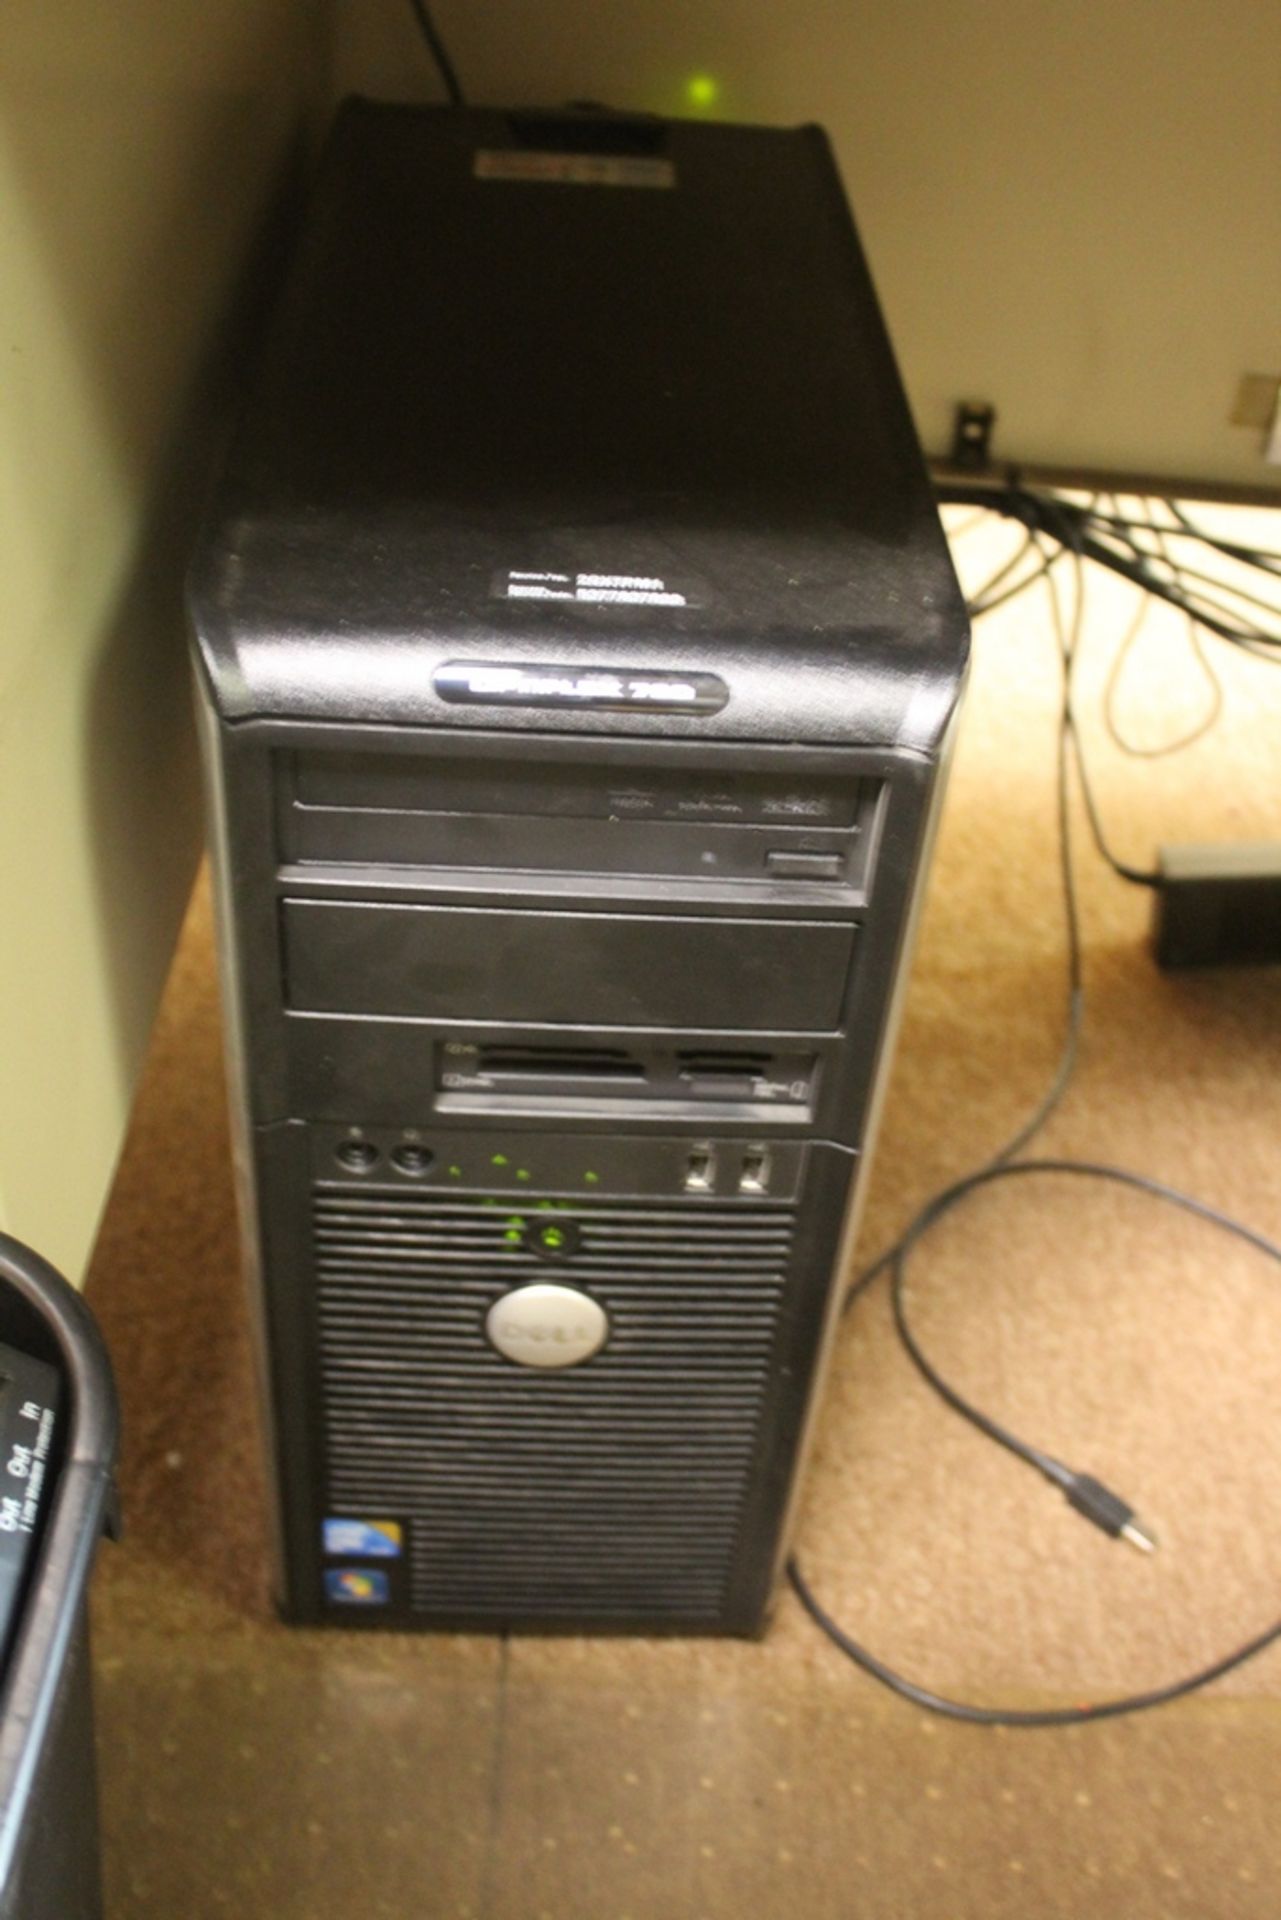 DELL OPTIPLEX 780 DESKTOP COMPUTER WITH ACER FLAT SCREEN MONITOR, KEYBOARD AND MOUSE - Image 2 of 2